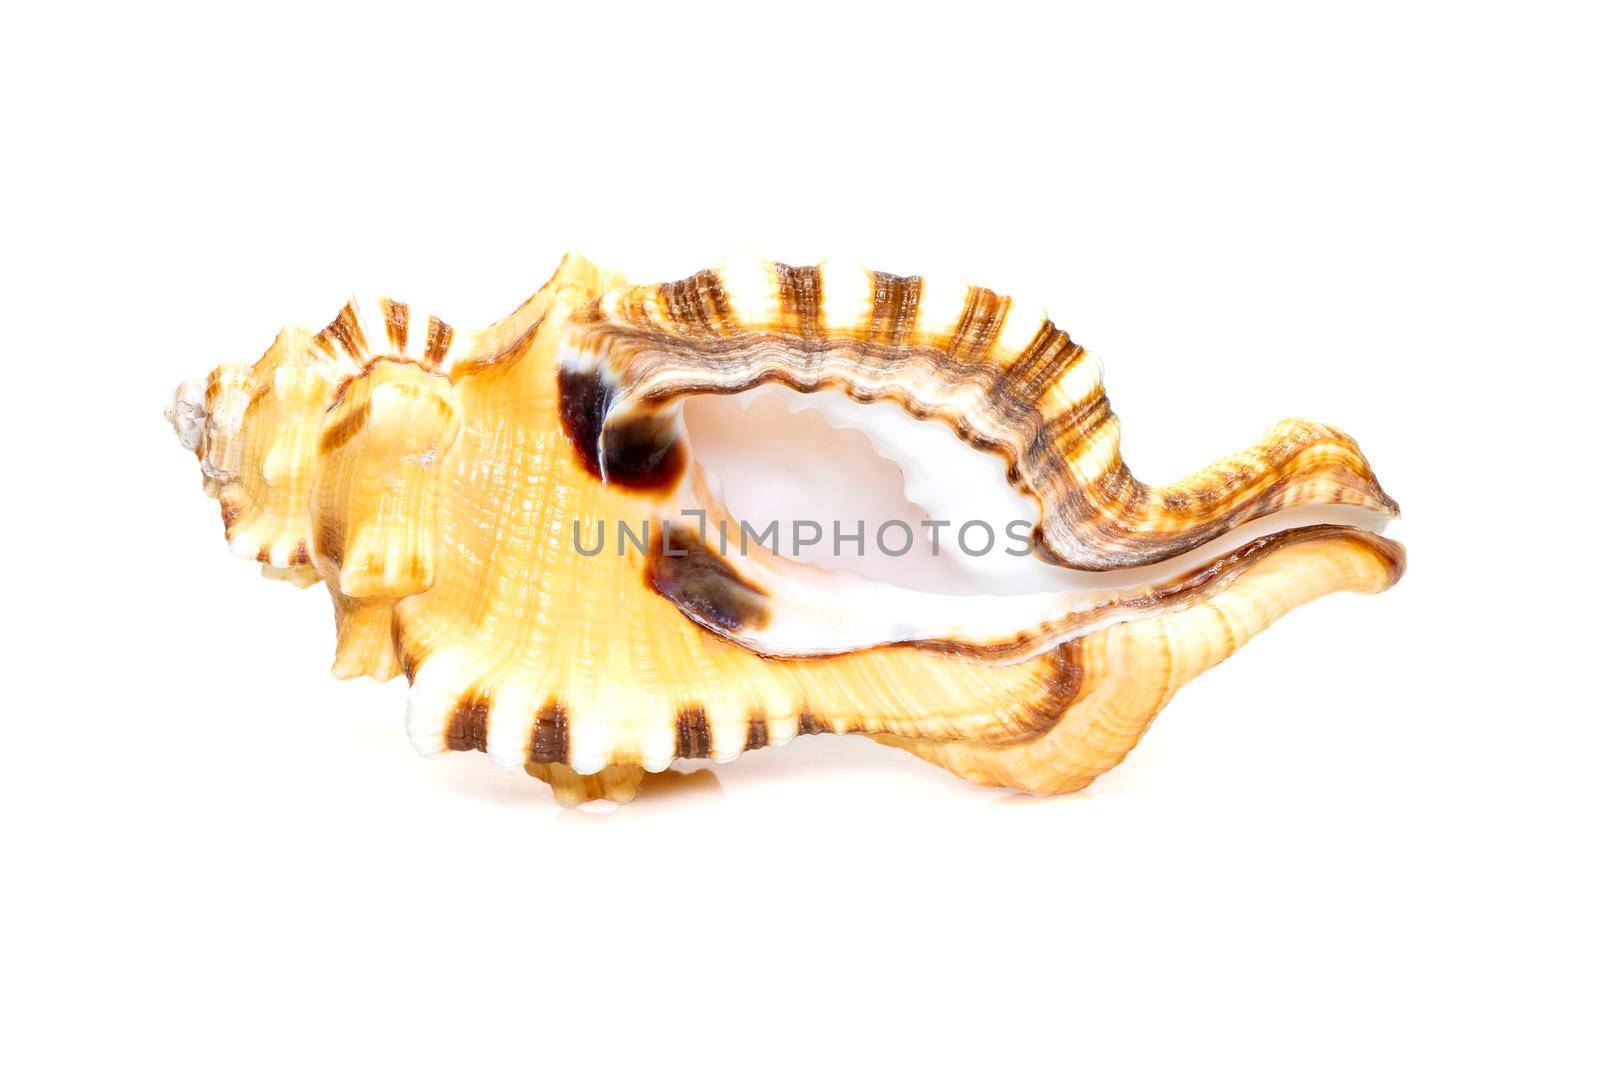 Image of lotoria lotoria sea shells, common name the black-spotted snail or washing bath triton isolated on white background. Sea snail. Undersea Animals. Sea Shells. by yod67